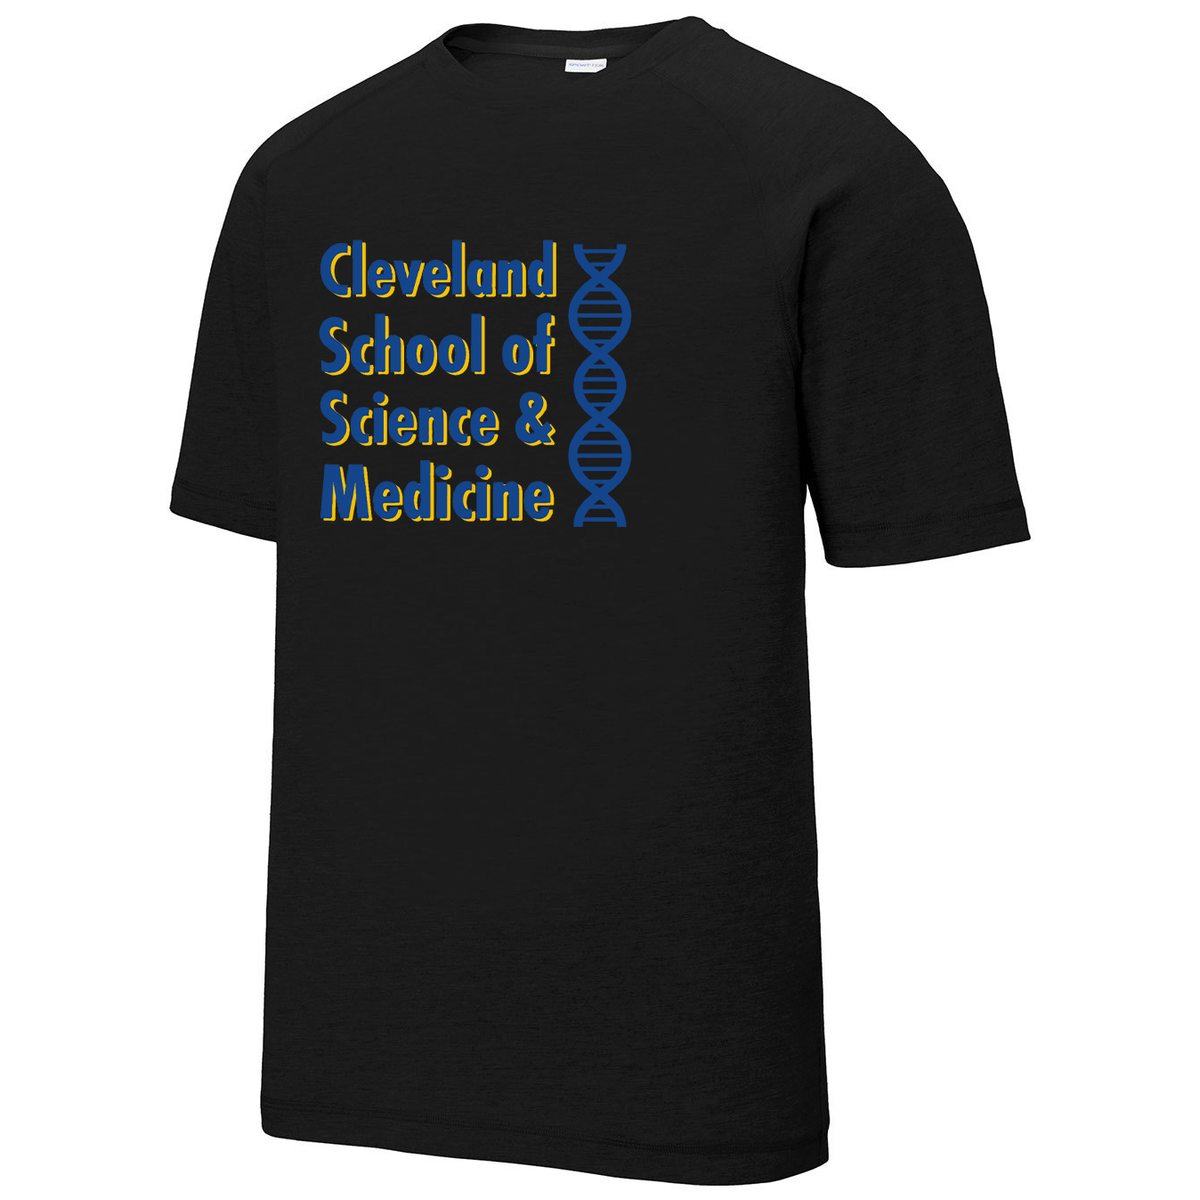 Cleveland School of Science and Medicine Raglan CottonTouch Tee